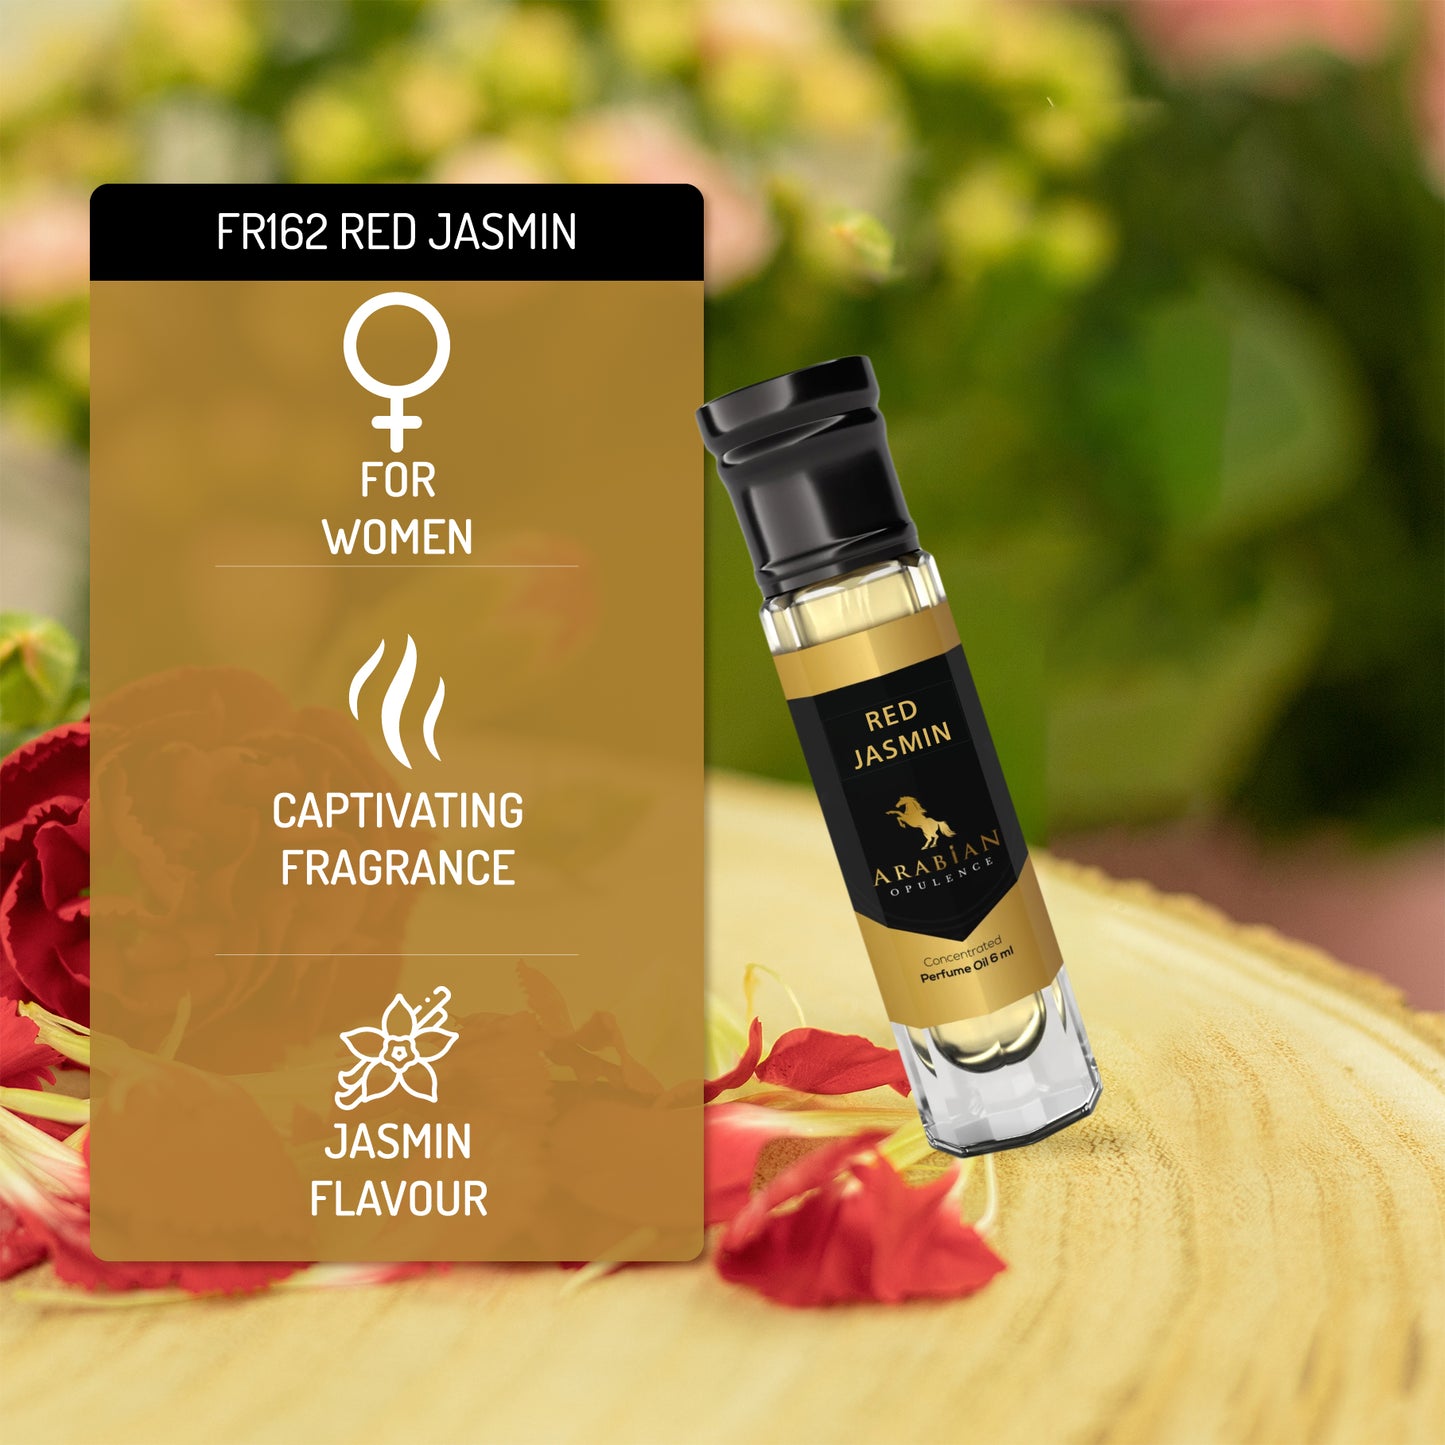 FR162 RED JASMIN FOR HER - Perfume Body Oil - Alcohol Free